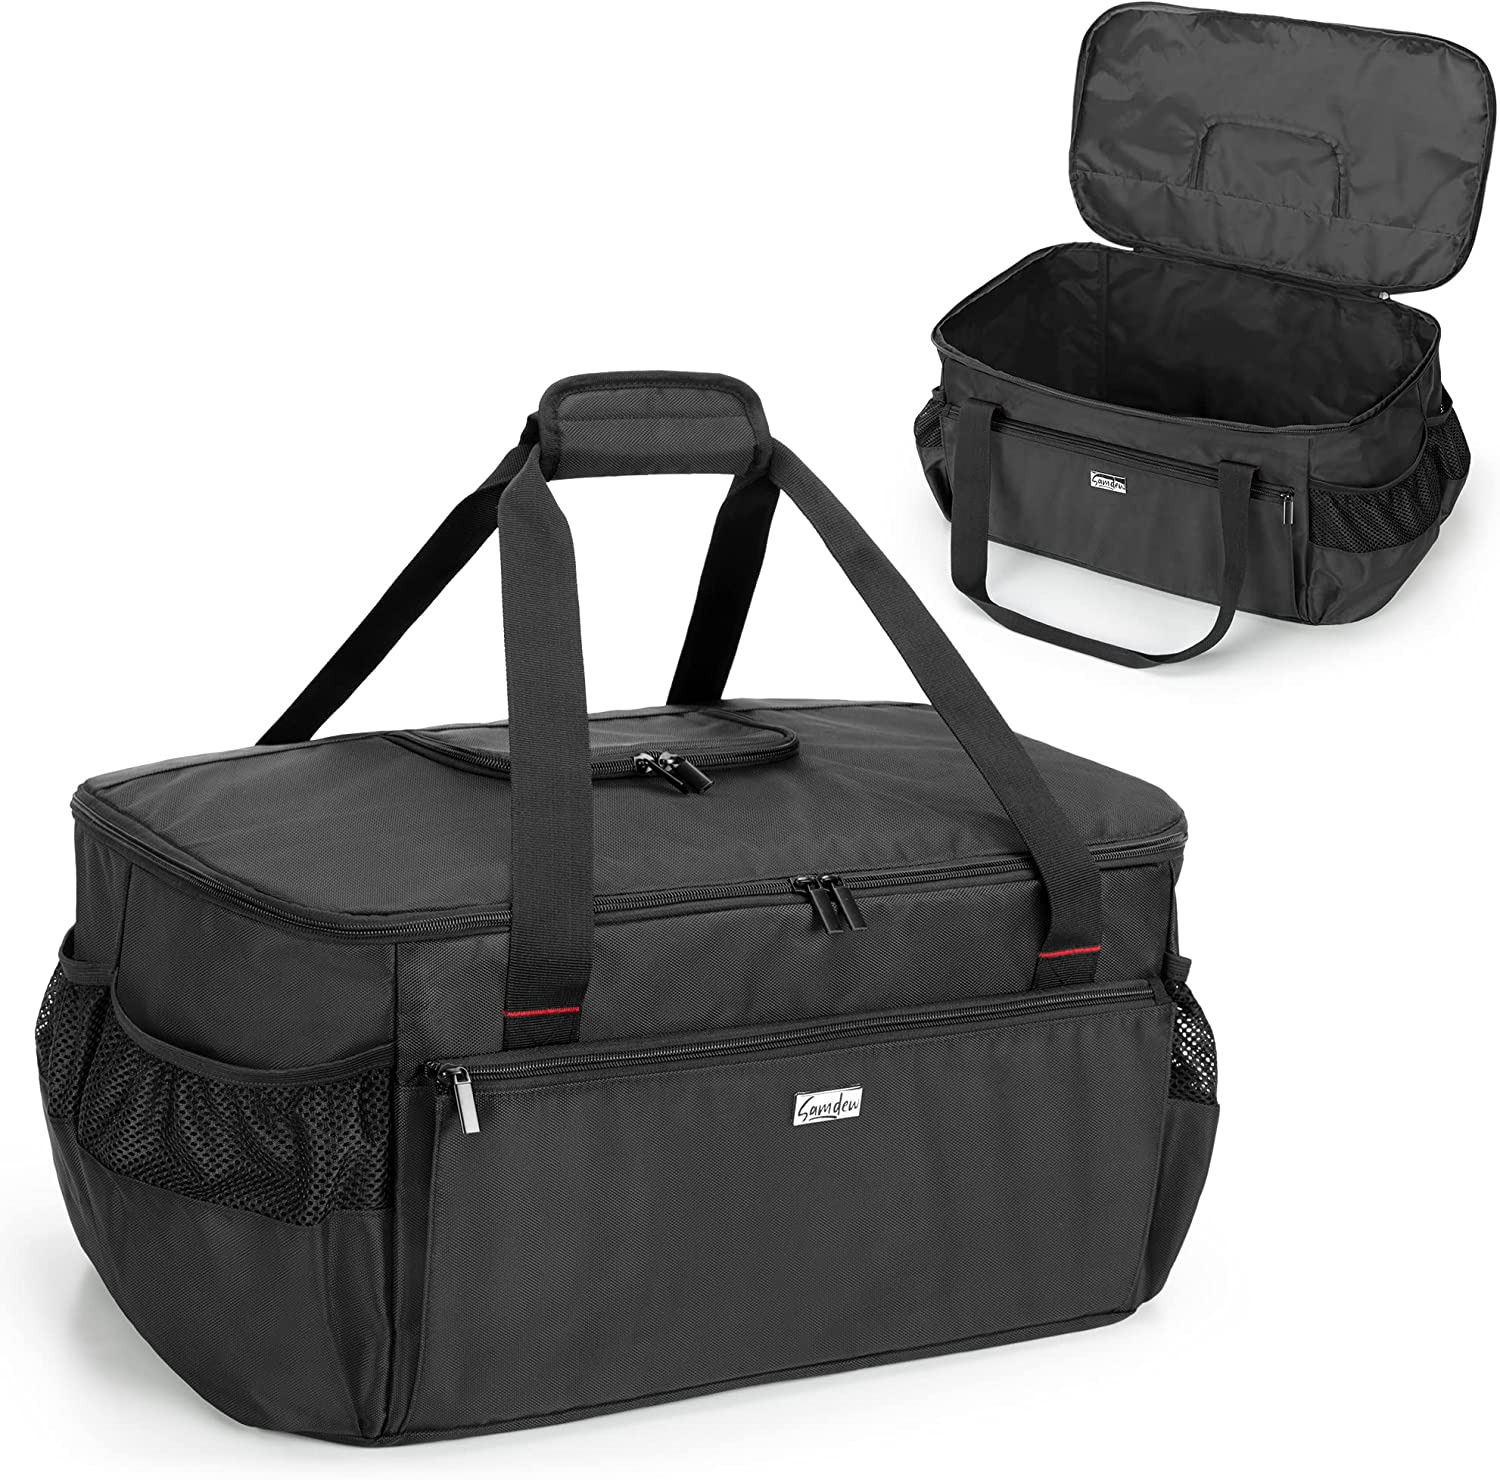 SAMDEW Portable Grill Carry Bag with Weber 1141001 Go-Anywhere Gas Grill Outd...